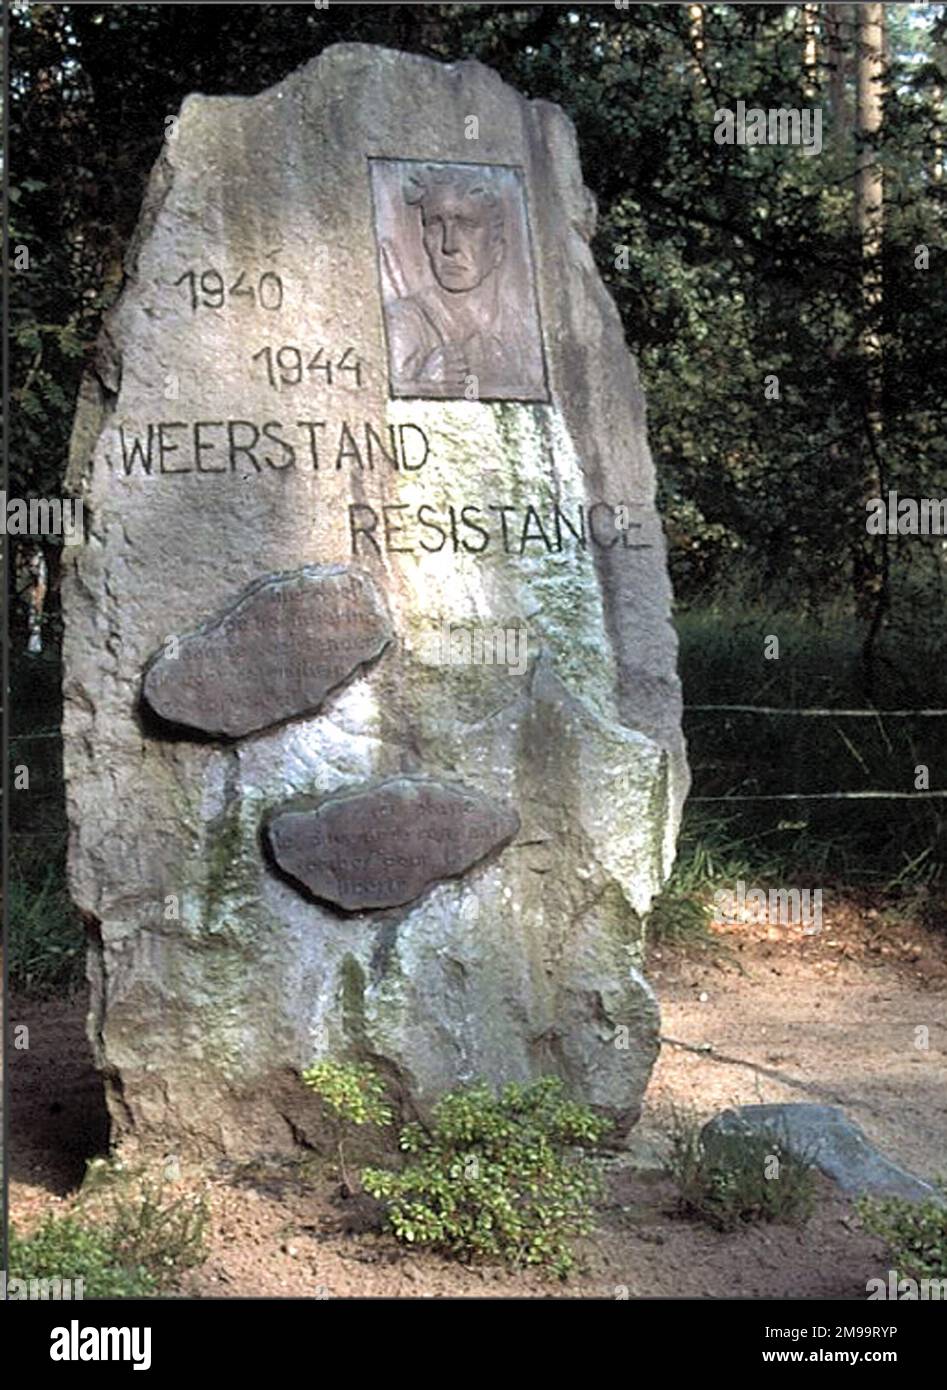 This Memorial in the Hechtel Woods is in a site known as 'The Secret Cemetery' and is signed to the Dunes des Fusilees. The execution site was established by the Germans in May 1942 and they kept detailed records of those shot - names, date and place of birth, offence, date of death etc. It was designated as the place of burial for all those executed in Belgium including many locals. After burial the graves were marked by a numbered pole. The area of the site was guarded by German snipers in towers at each corner. Stock Photo